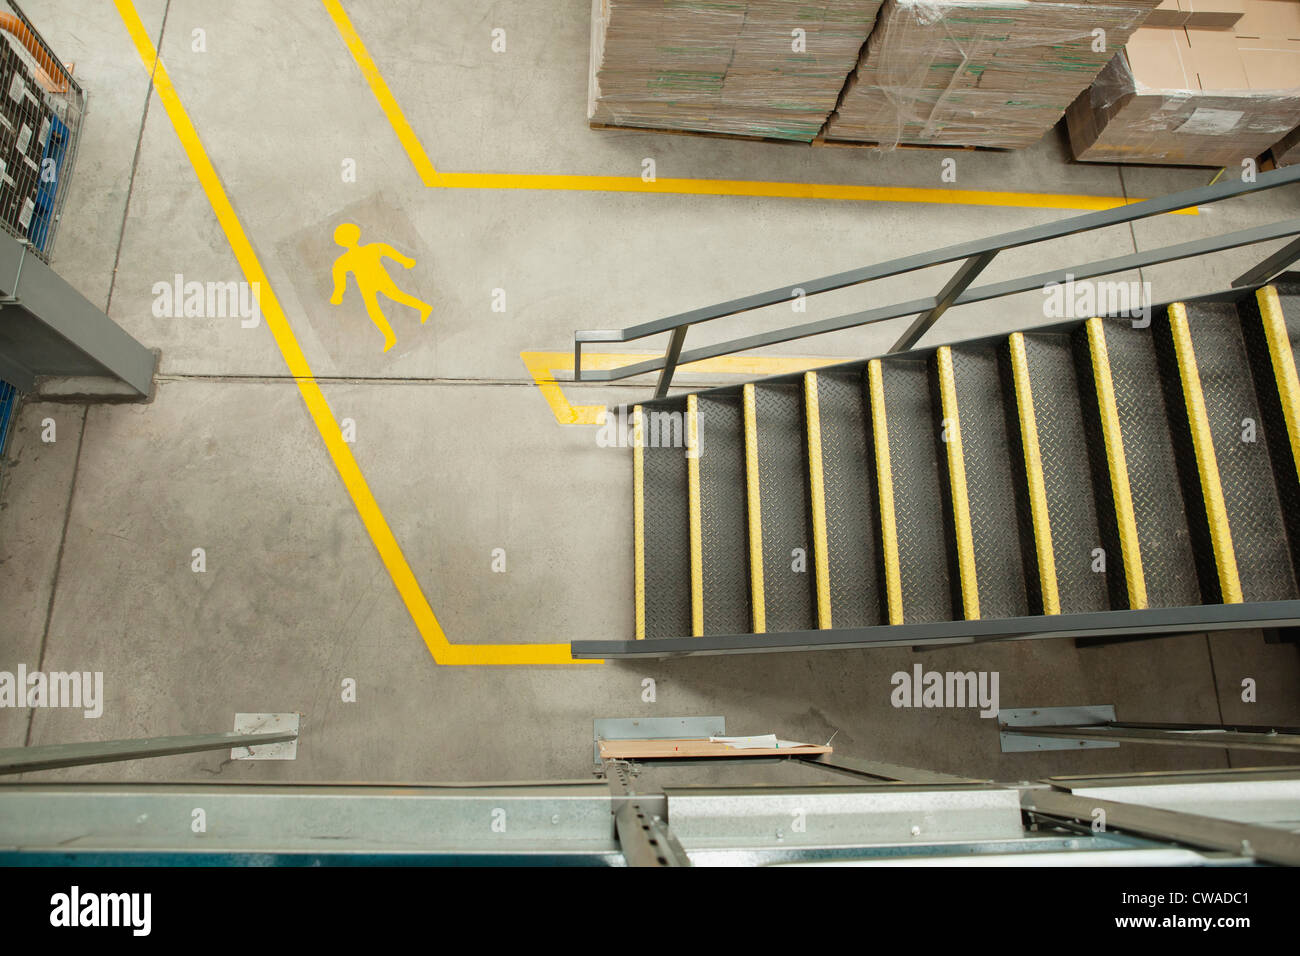 Steps and yellow lines in warehouse, elevated view Stock Photo